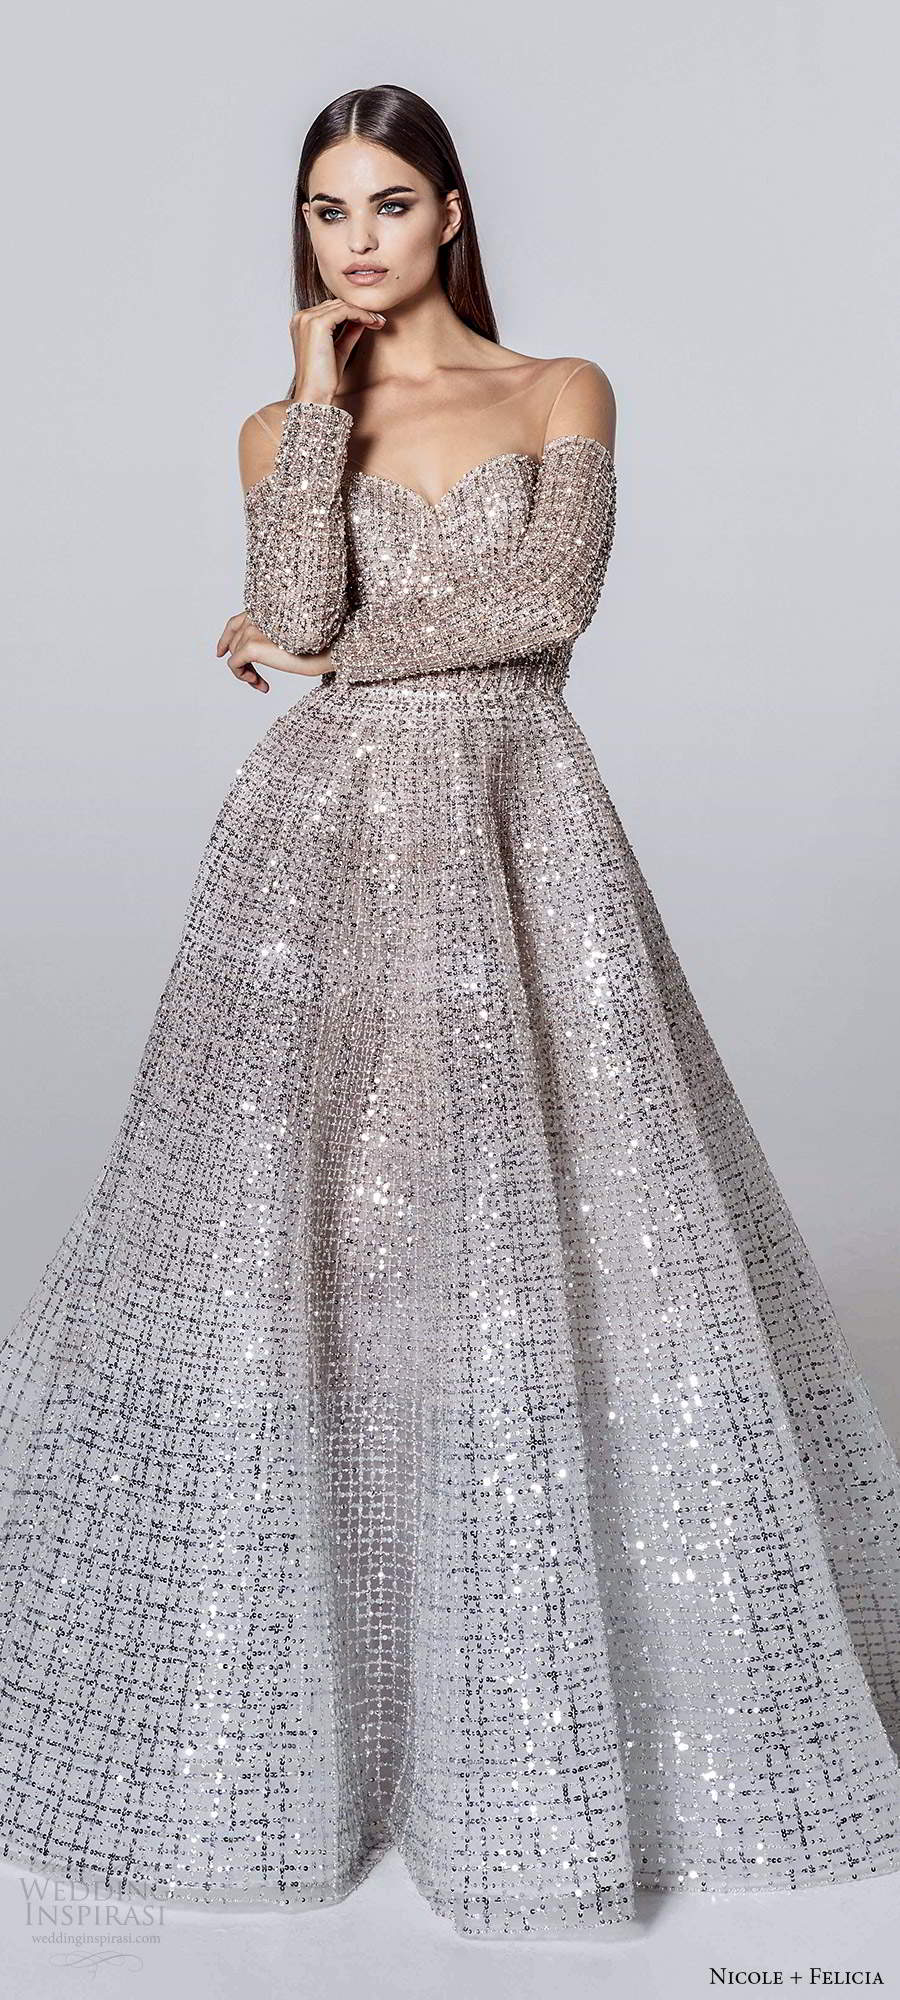 nicole and felicia fall 2020 bridal long sleeves illusion jewel sweetheart neckline fully embellished glitzy a line ball gown wedding dress chapel train (5) lv